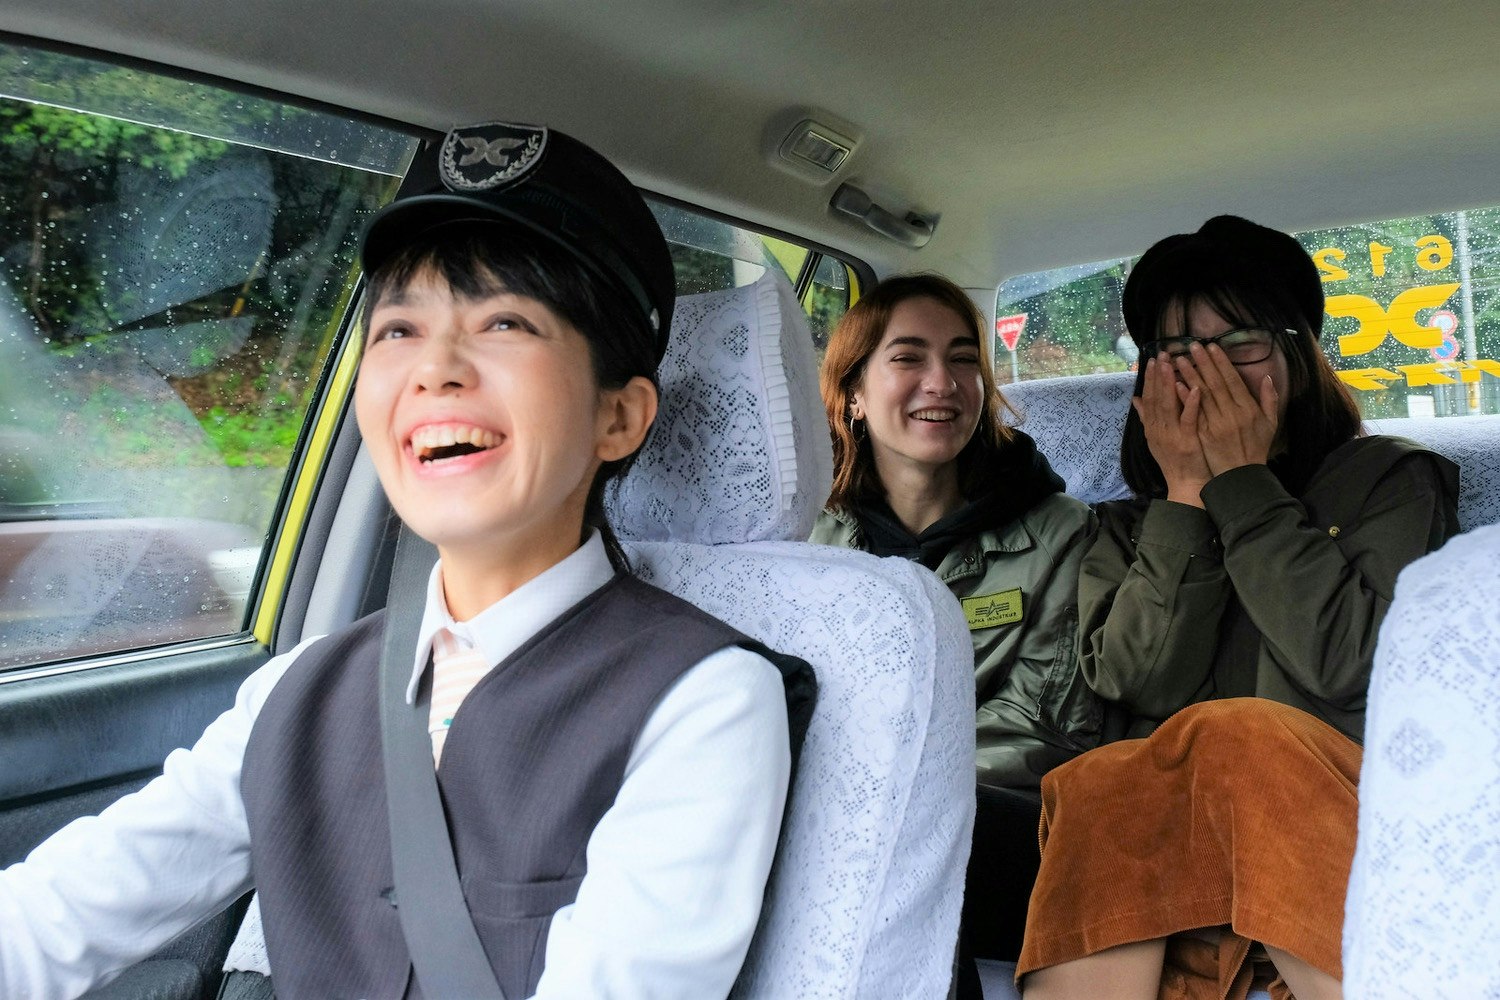 A laughing udon taxi driver in a conductor's hat and a grey vest looks in the rear view mirror at her giggling passengers in the back seat, who are wearing olive green jackets and an orange skirt. The taxi's seats are covered in lace doily slip covers and a light rain is falling on the windows outside